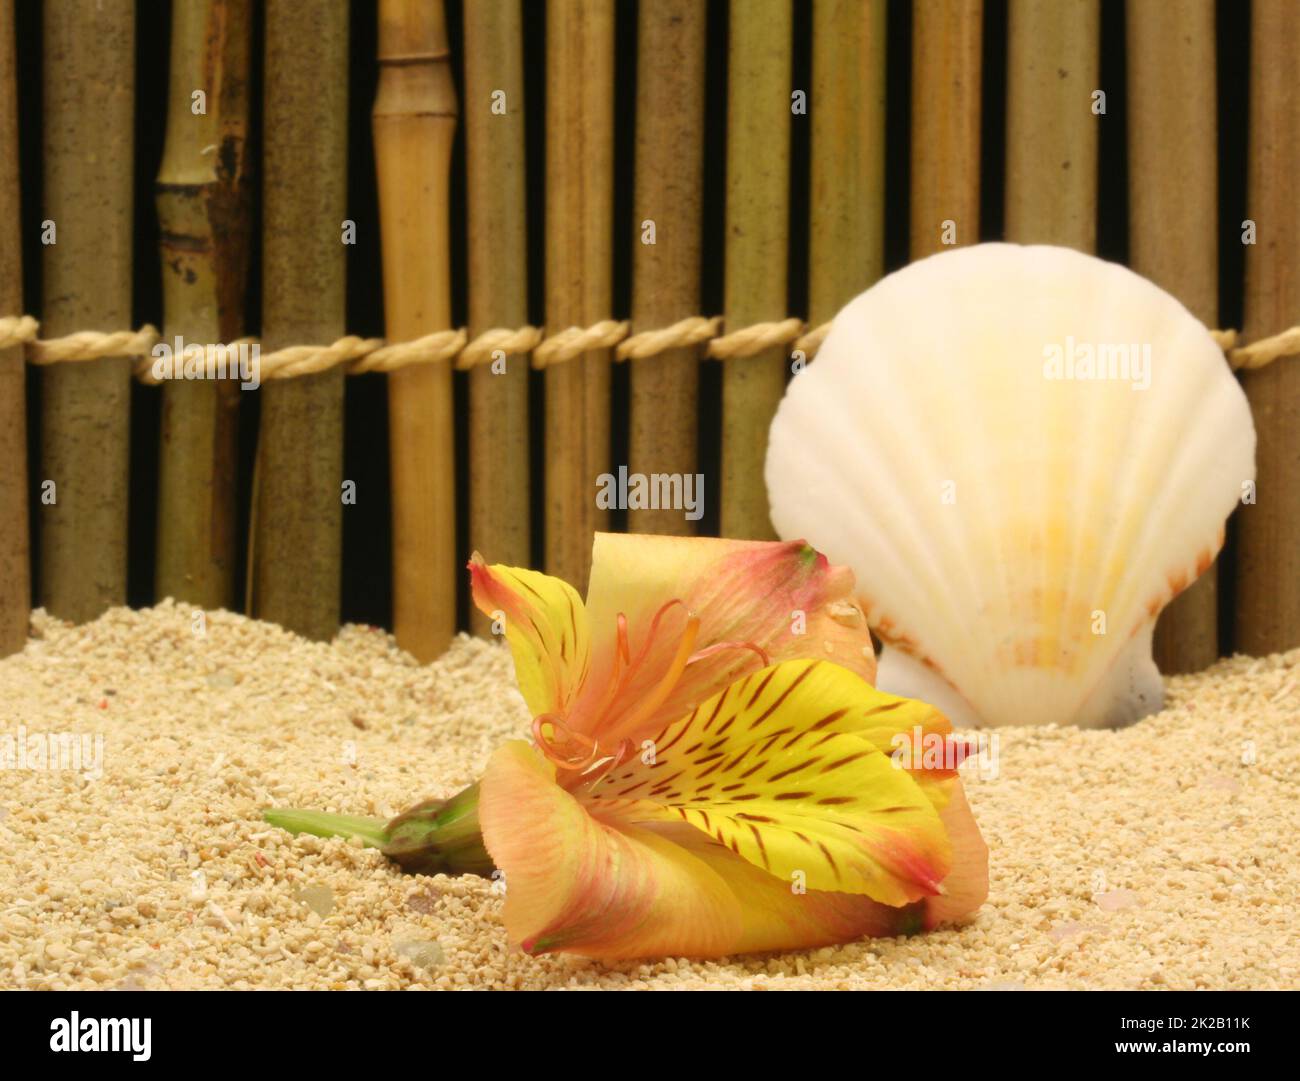 Flower on Beach With Seashell and Bamboo Fence in Background Stock Photo